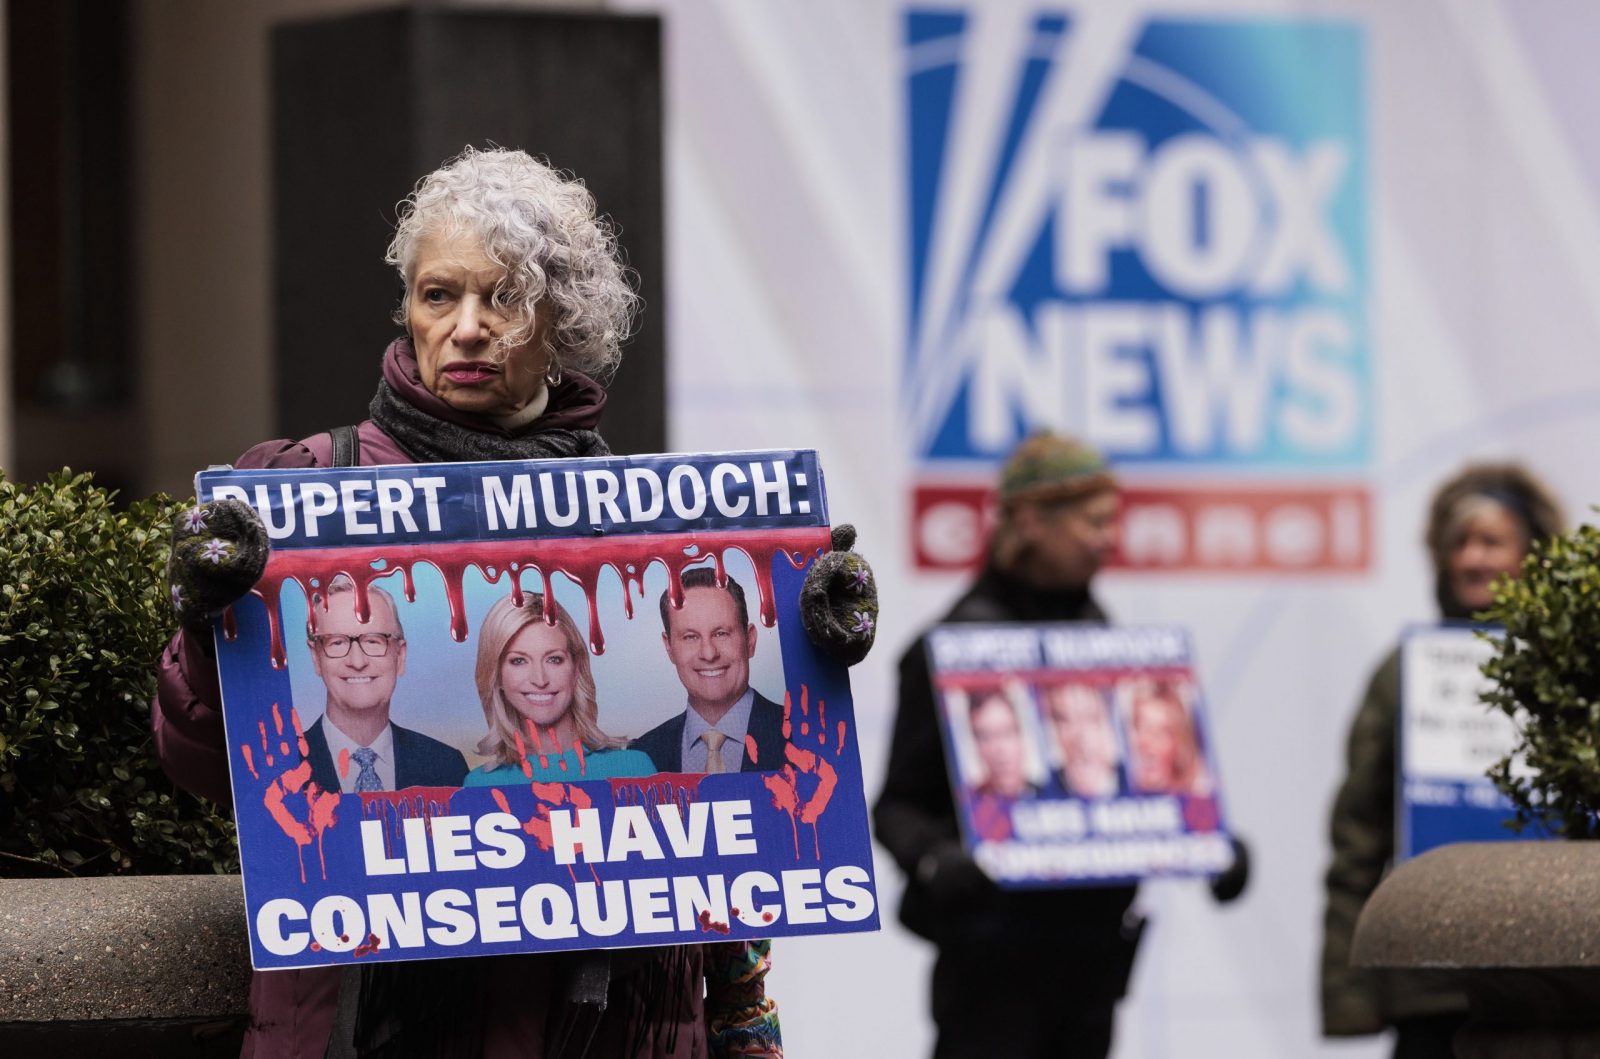 epa10495778 Sandy R., of New York, holds a sign while participating in a protest organized by the group Rise and Resist outside of Fox News headquarters in New York, New York, USA, 28 February 2023. A deposition which was recently made public from Dominion Voting Systems’ $1.6 billion defamation lawsuit against Fox shows Rupert Murdoch, the chairman company that owns Fox News, admitting that a number of the television station’s on air personalities promoted the false narrative that the 2020 presidential election was stolen from then President Donald Trump.  EPA/JUSTIN LANE